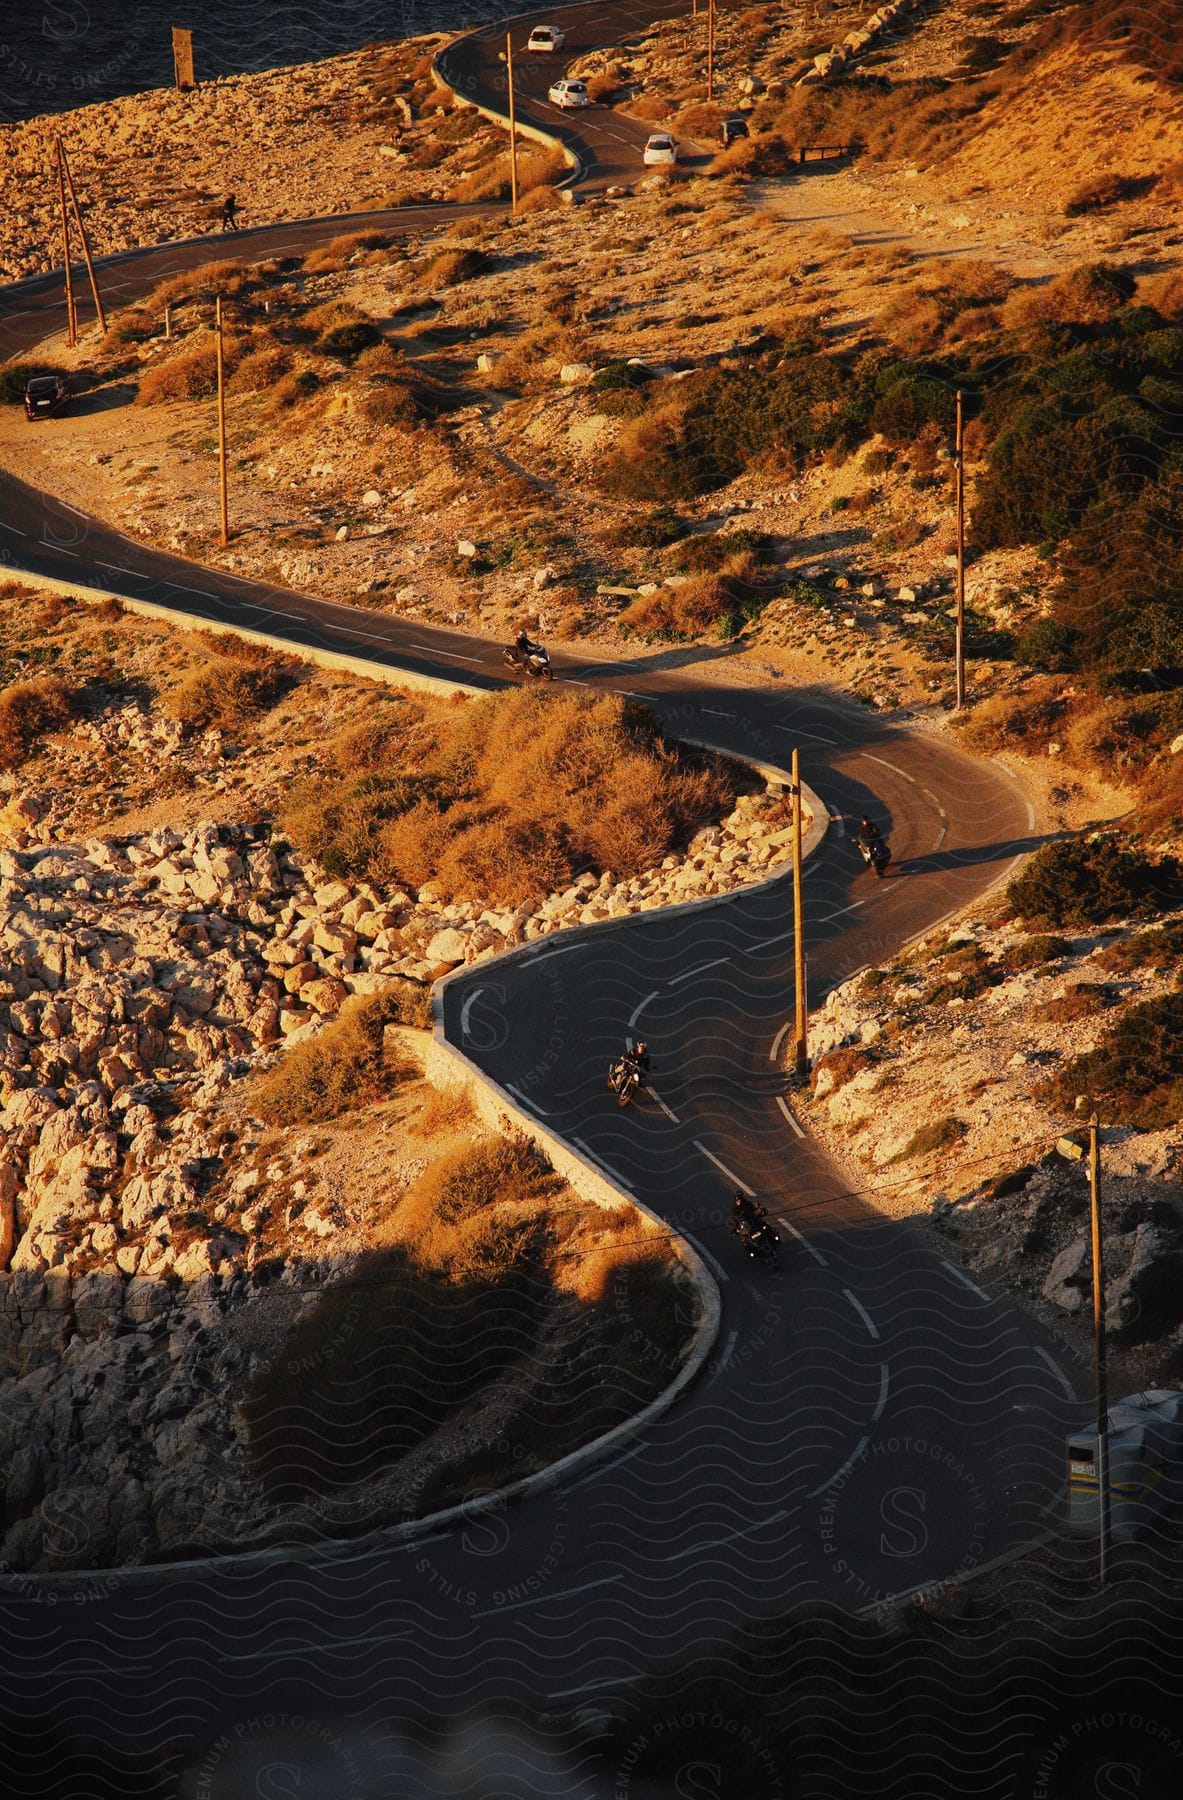 An aerial view of a group of bikers riding motorcycles on a winding road.